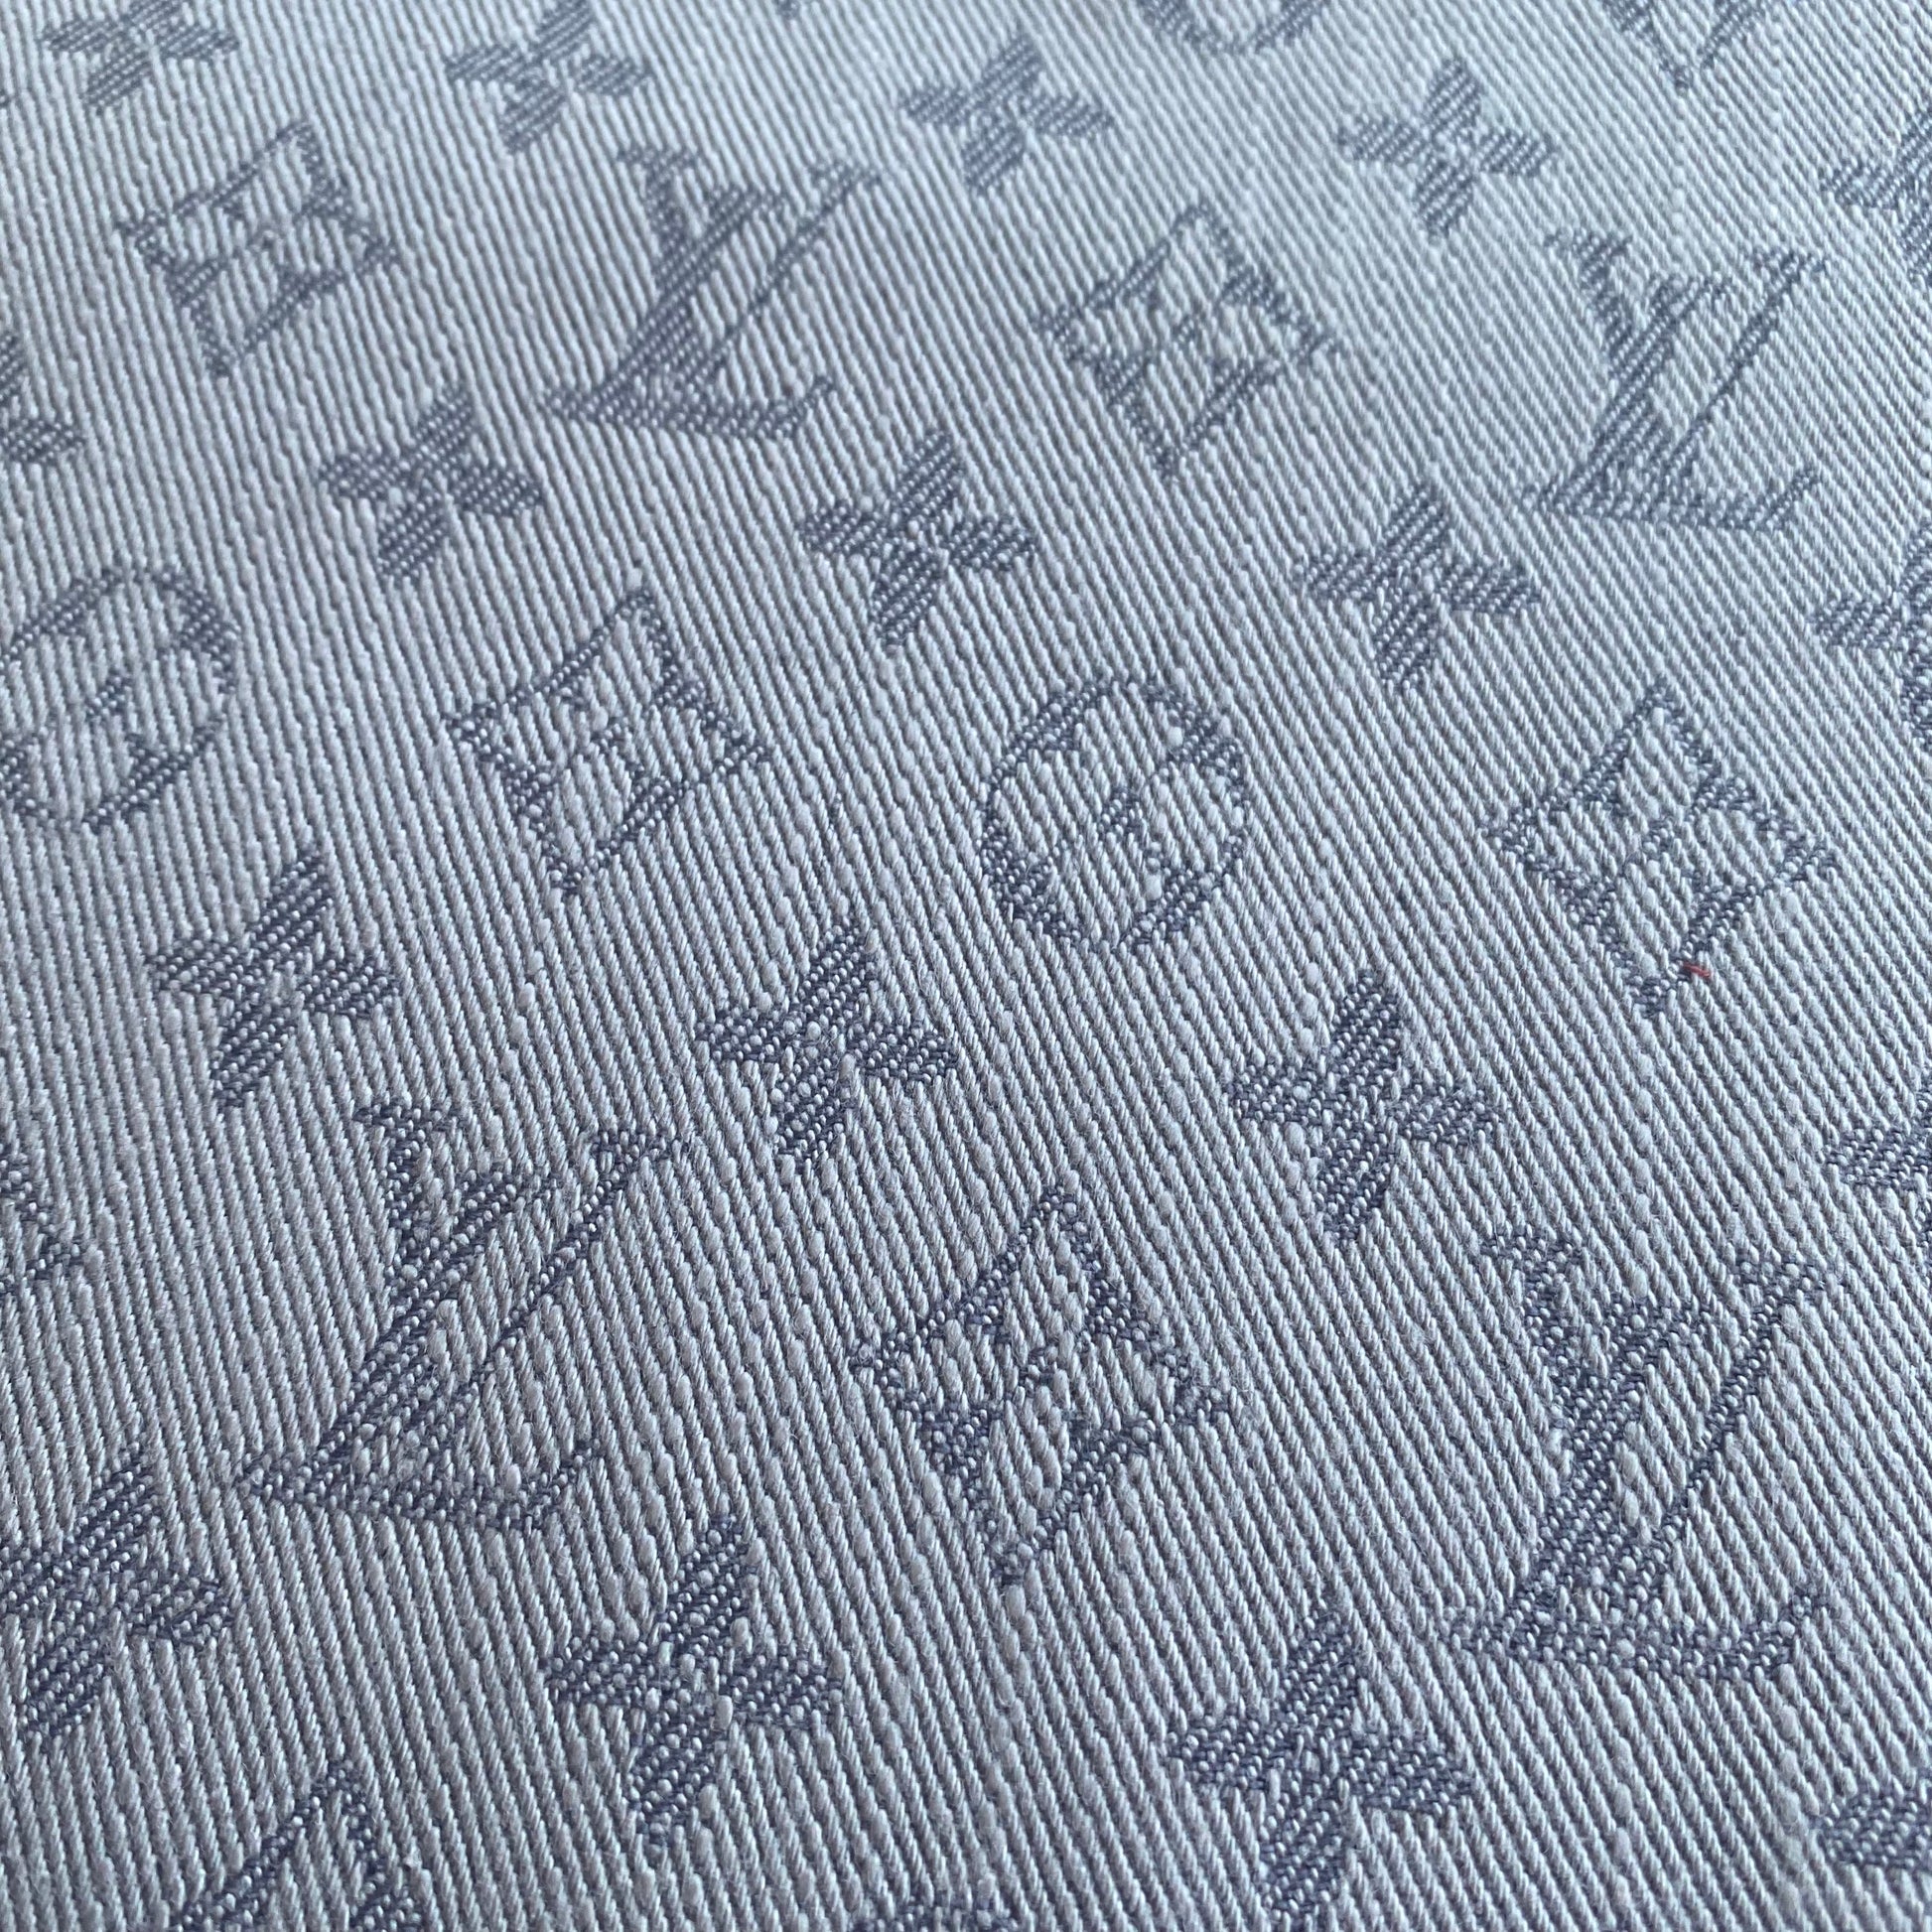 LV Luxury Jacquard Denim Fabrics in 13 Colors GYBY316 for Designer Jackets,  Jeans, Shirts, Suits